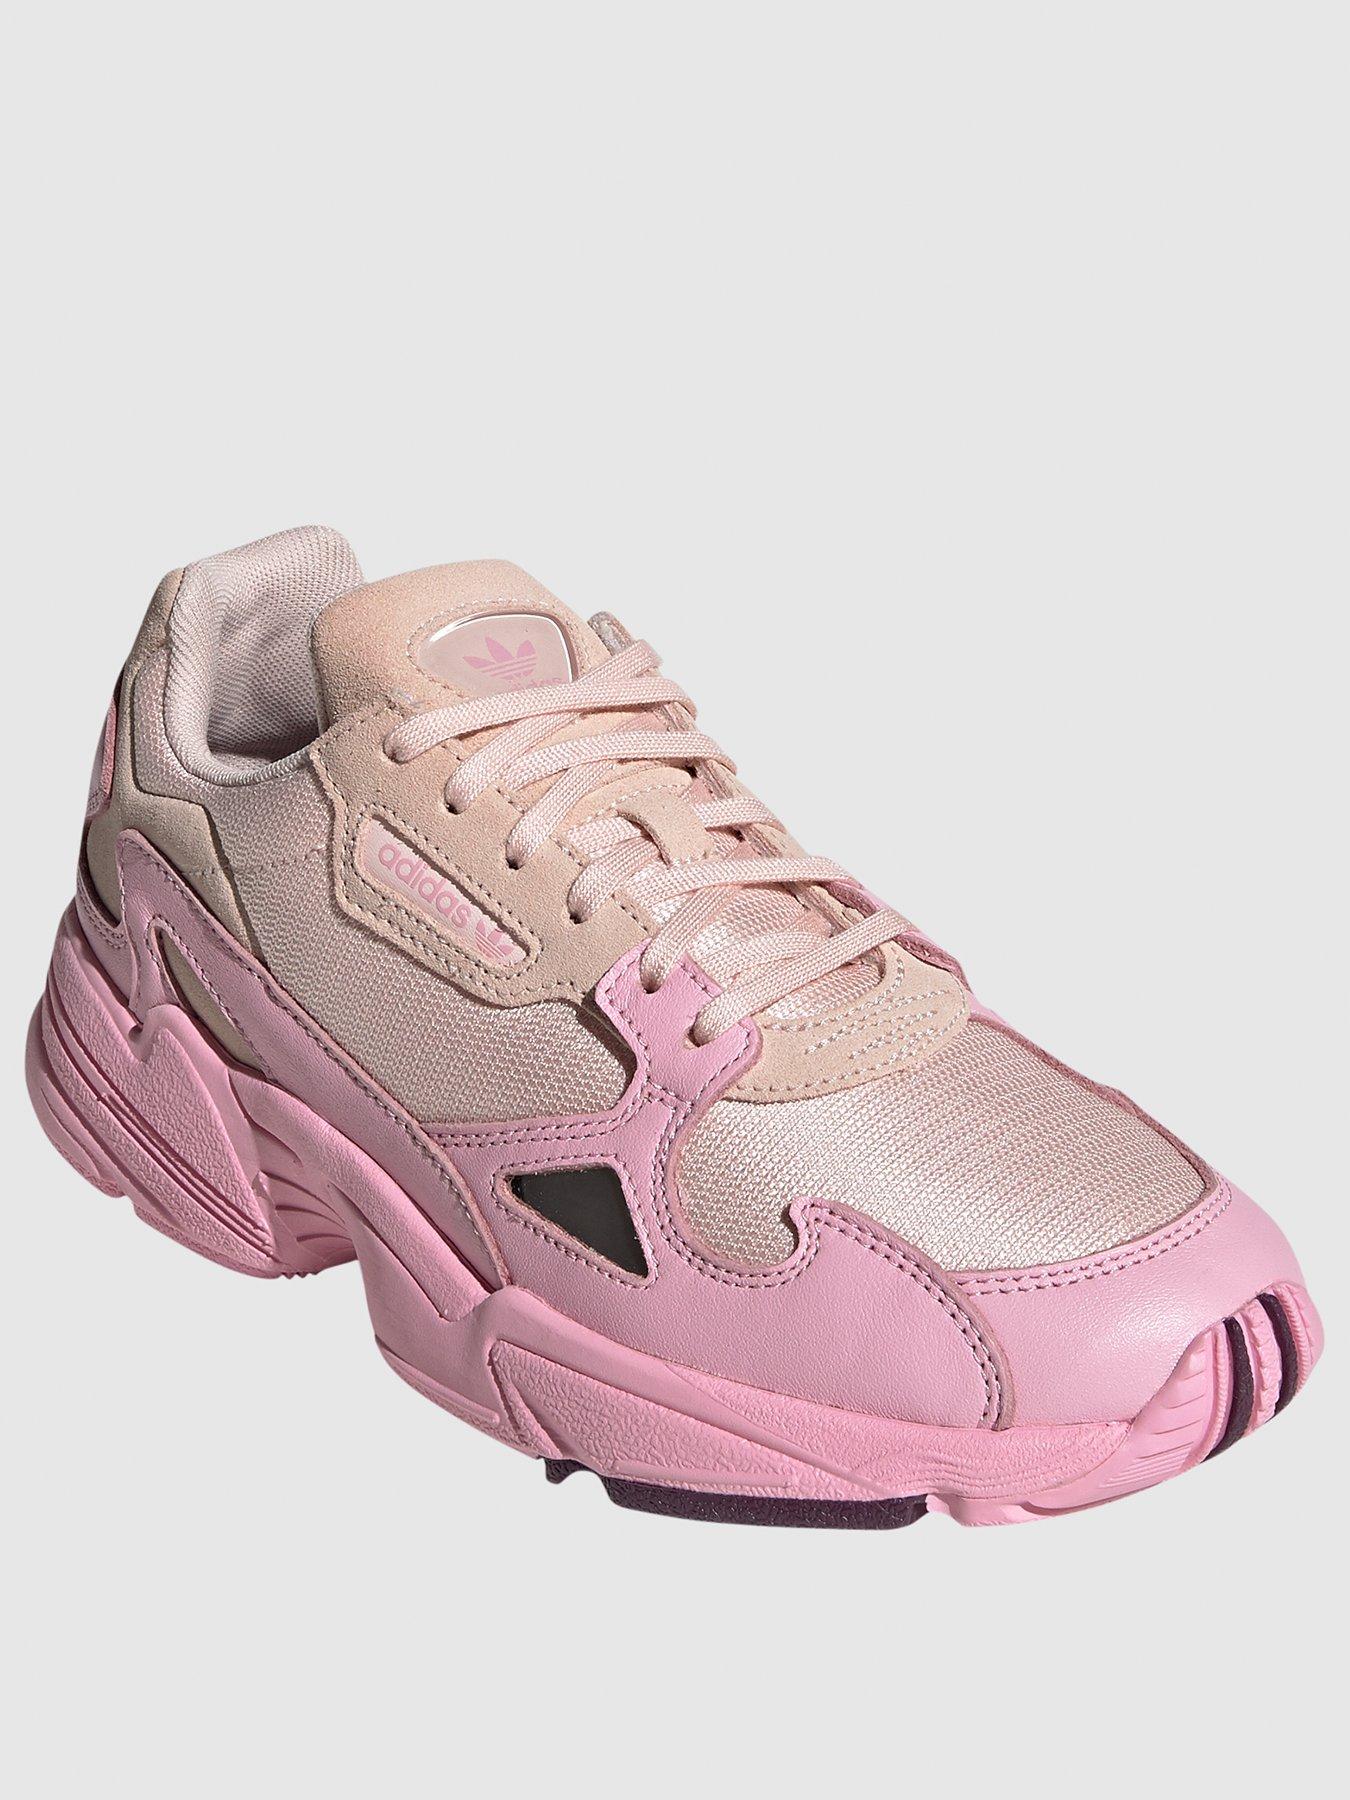 adidas Originals Falcon Trainers - Pink | very.co.uk